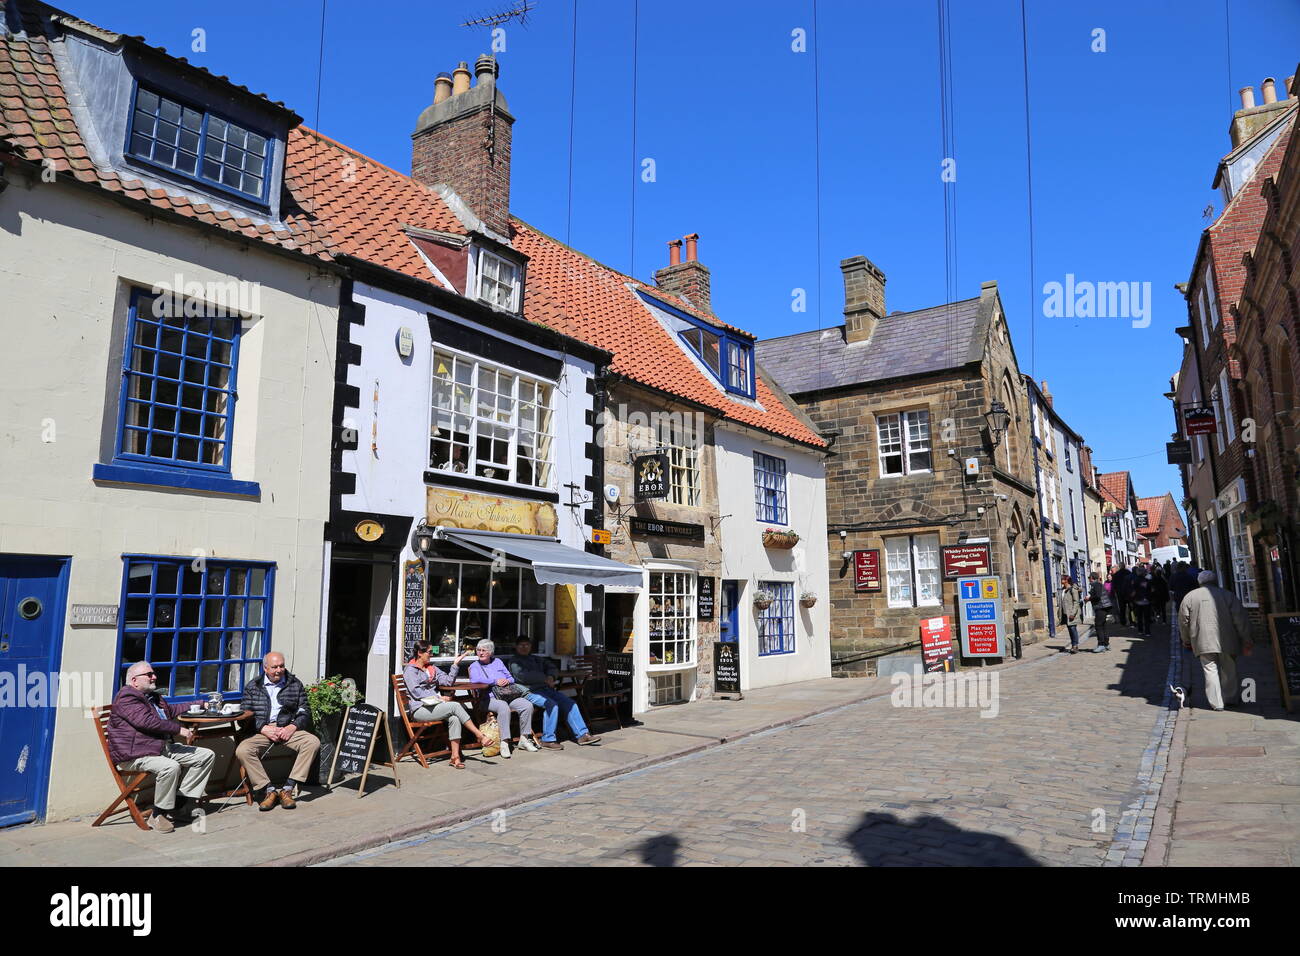 Marie Antoinette's and Ebor Jetworks, Church Street, Whitby, Borough of Scarborough, North Yorkshire, England, Great Britain, United Kingdom, Europe Stock Photo